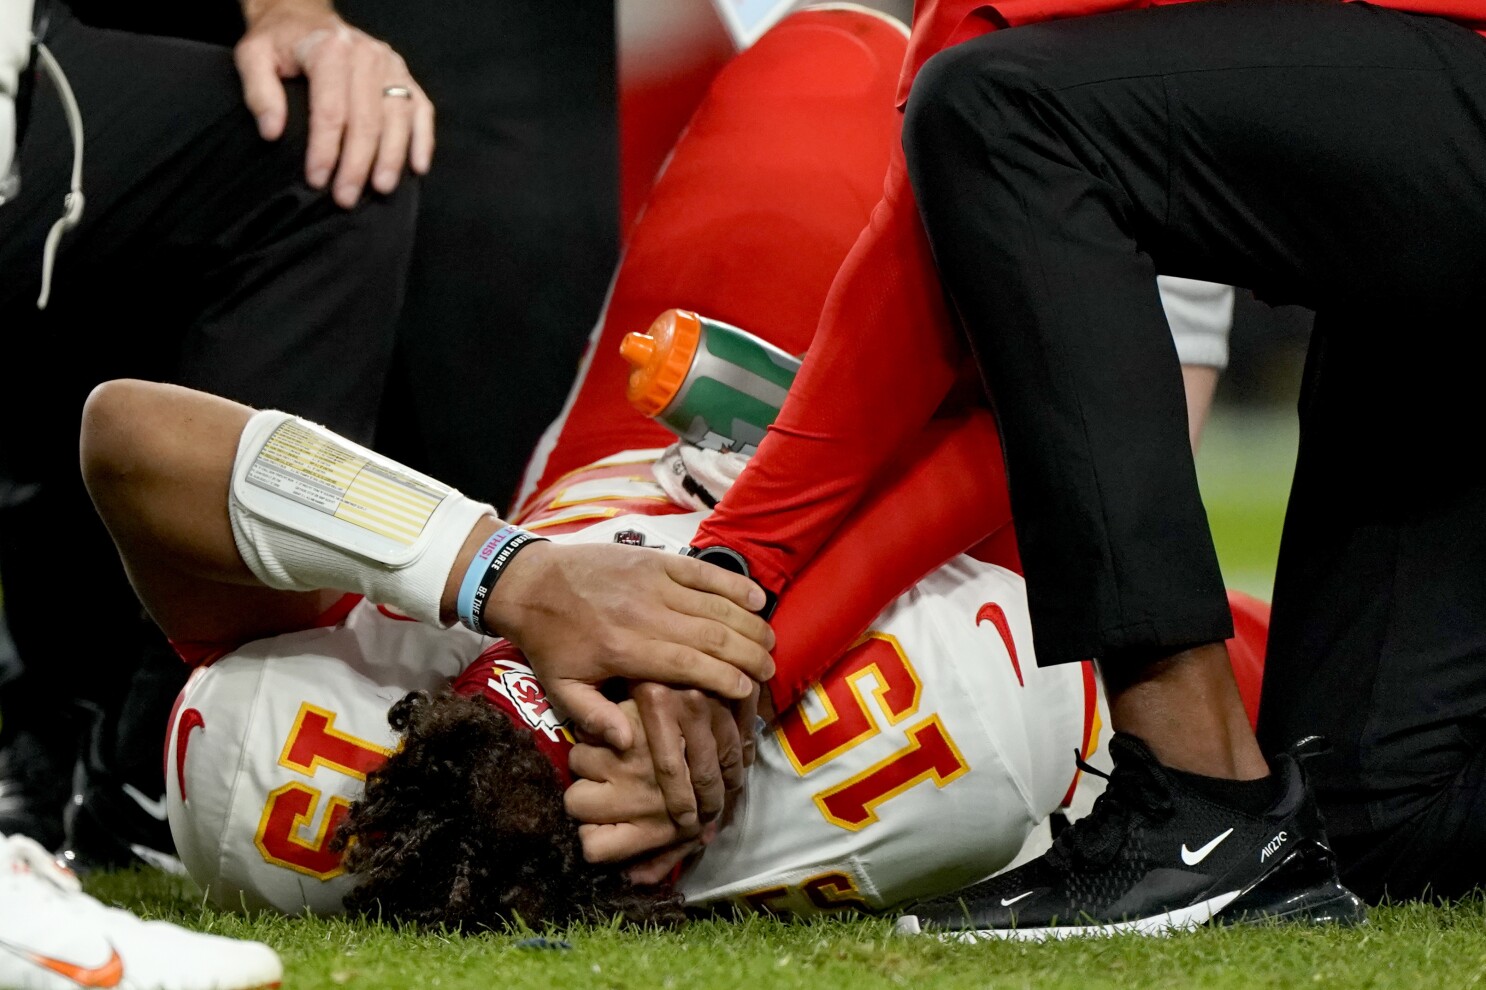 Patrick Mahomes Will Need Surgery On Knee Sooner Or Later The San Diego Union Tribune